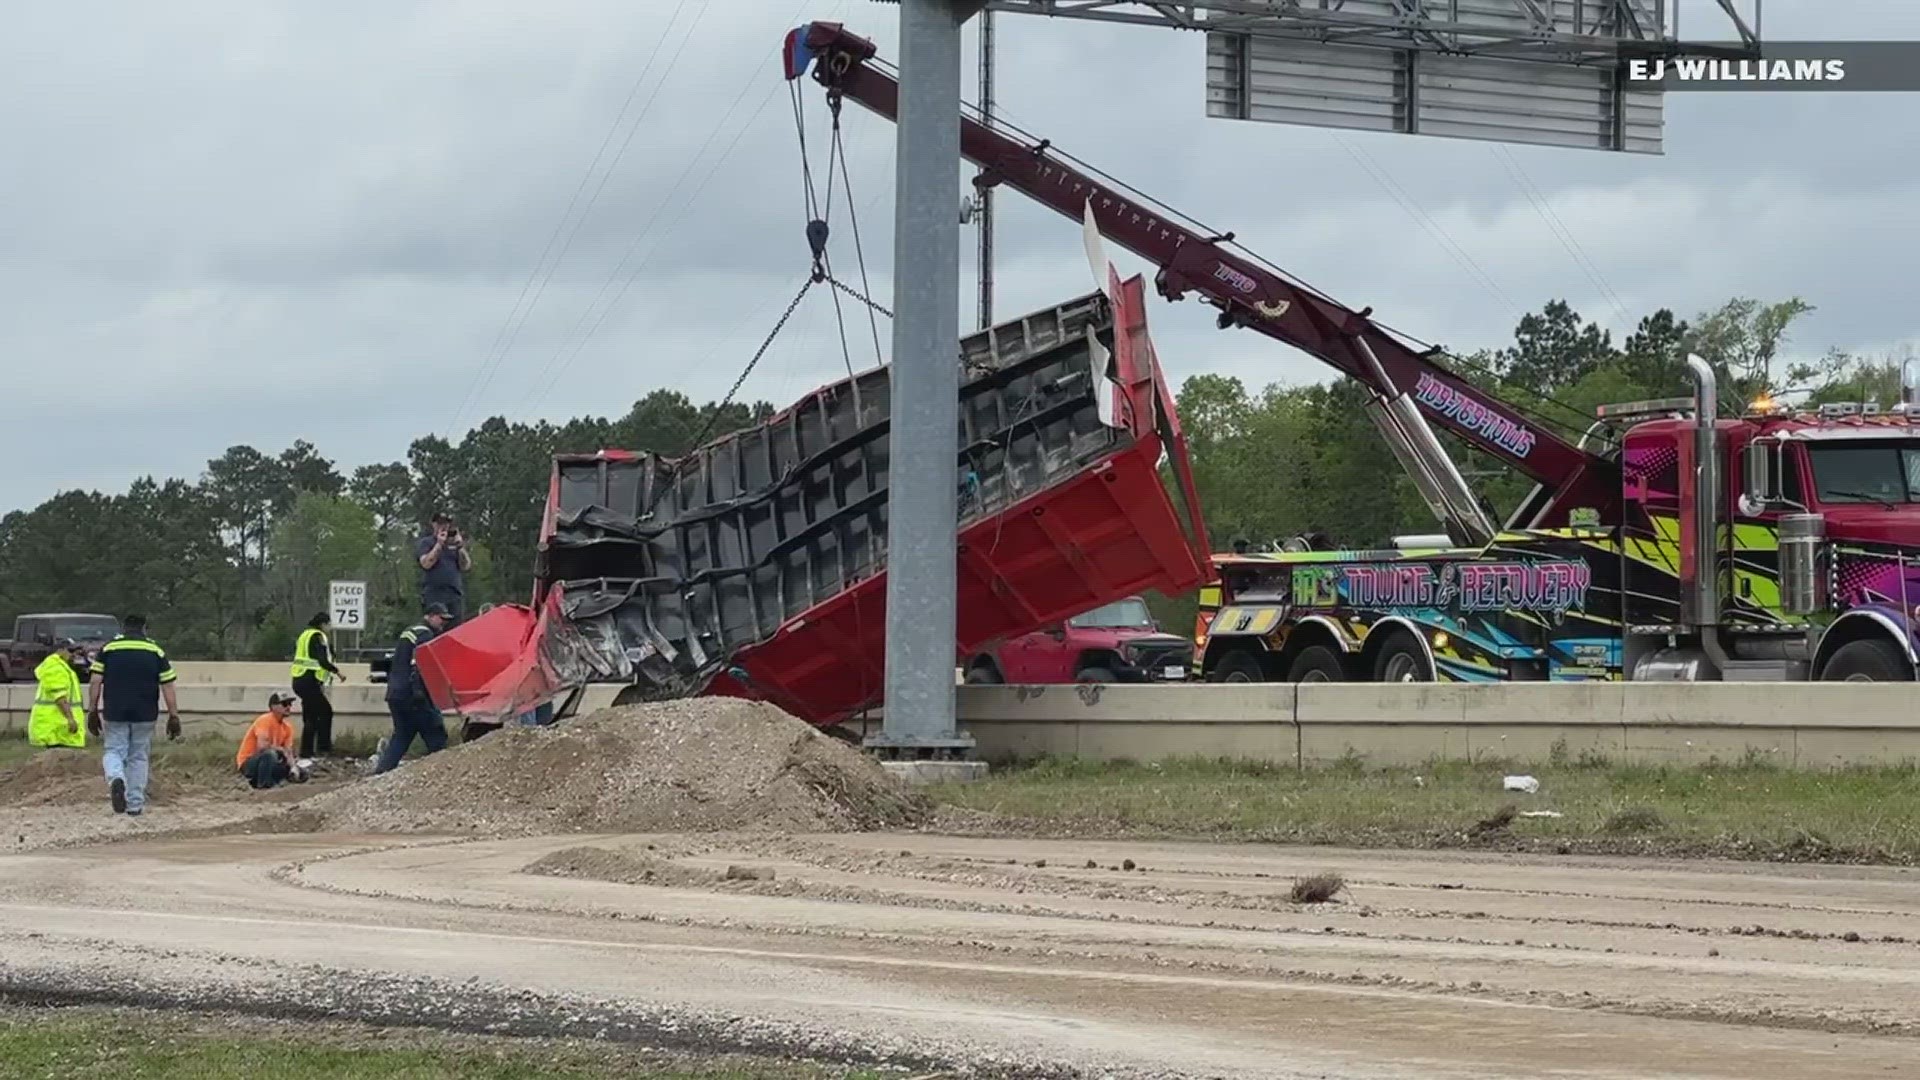 Orange County Pct. 4 Constable Matt Ortego tells 12News it appears the dump truck had a blow out, causing the front of the vehicle to hit the outside barrier.